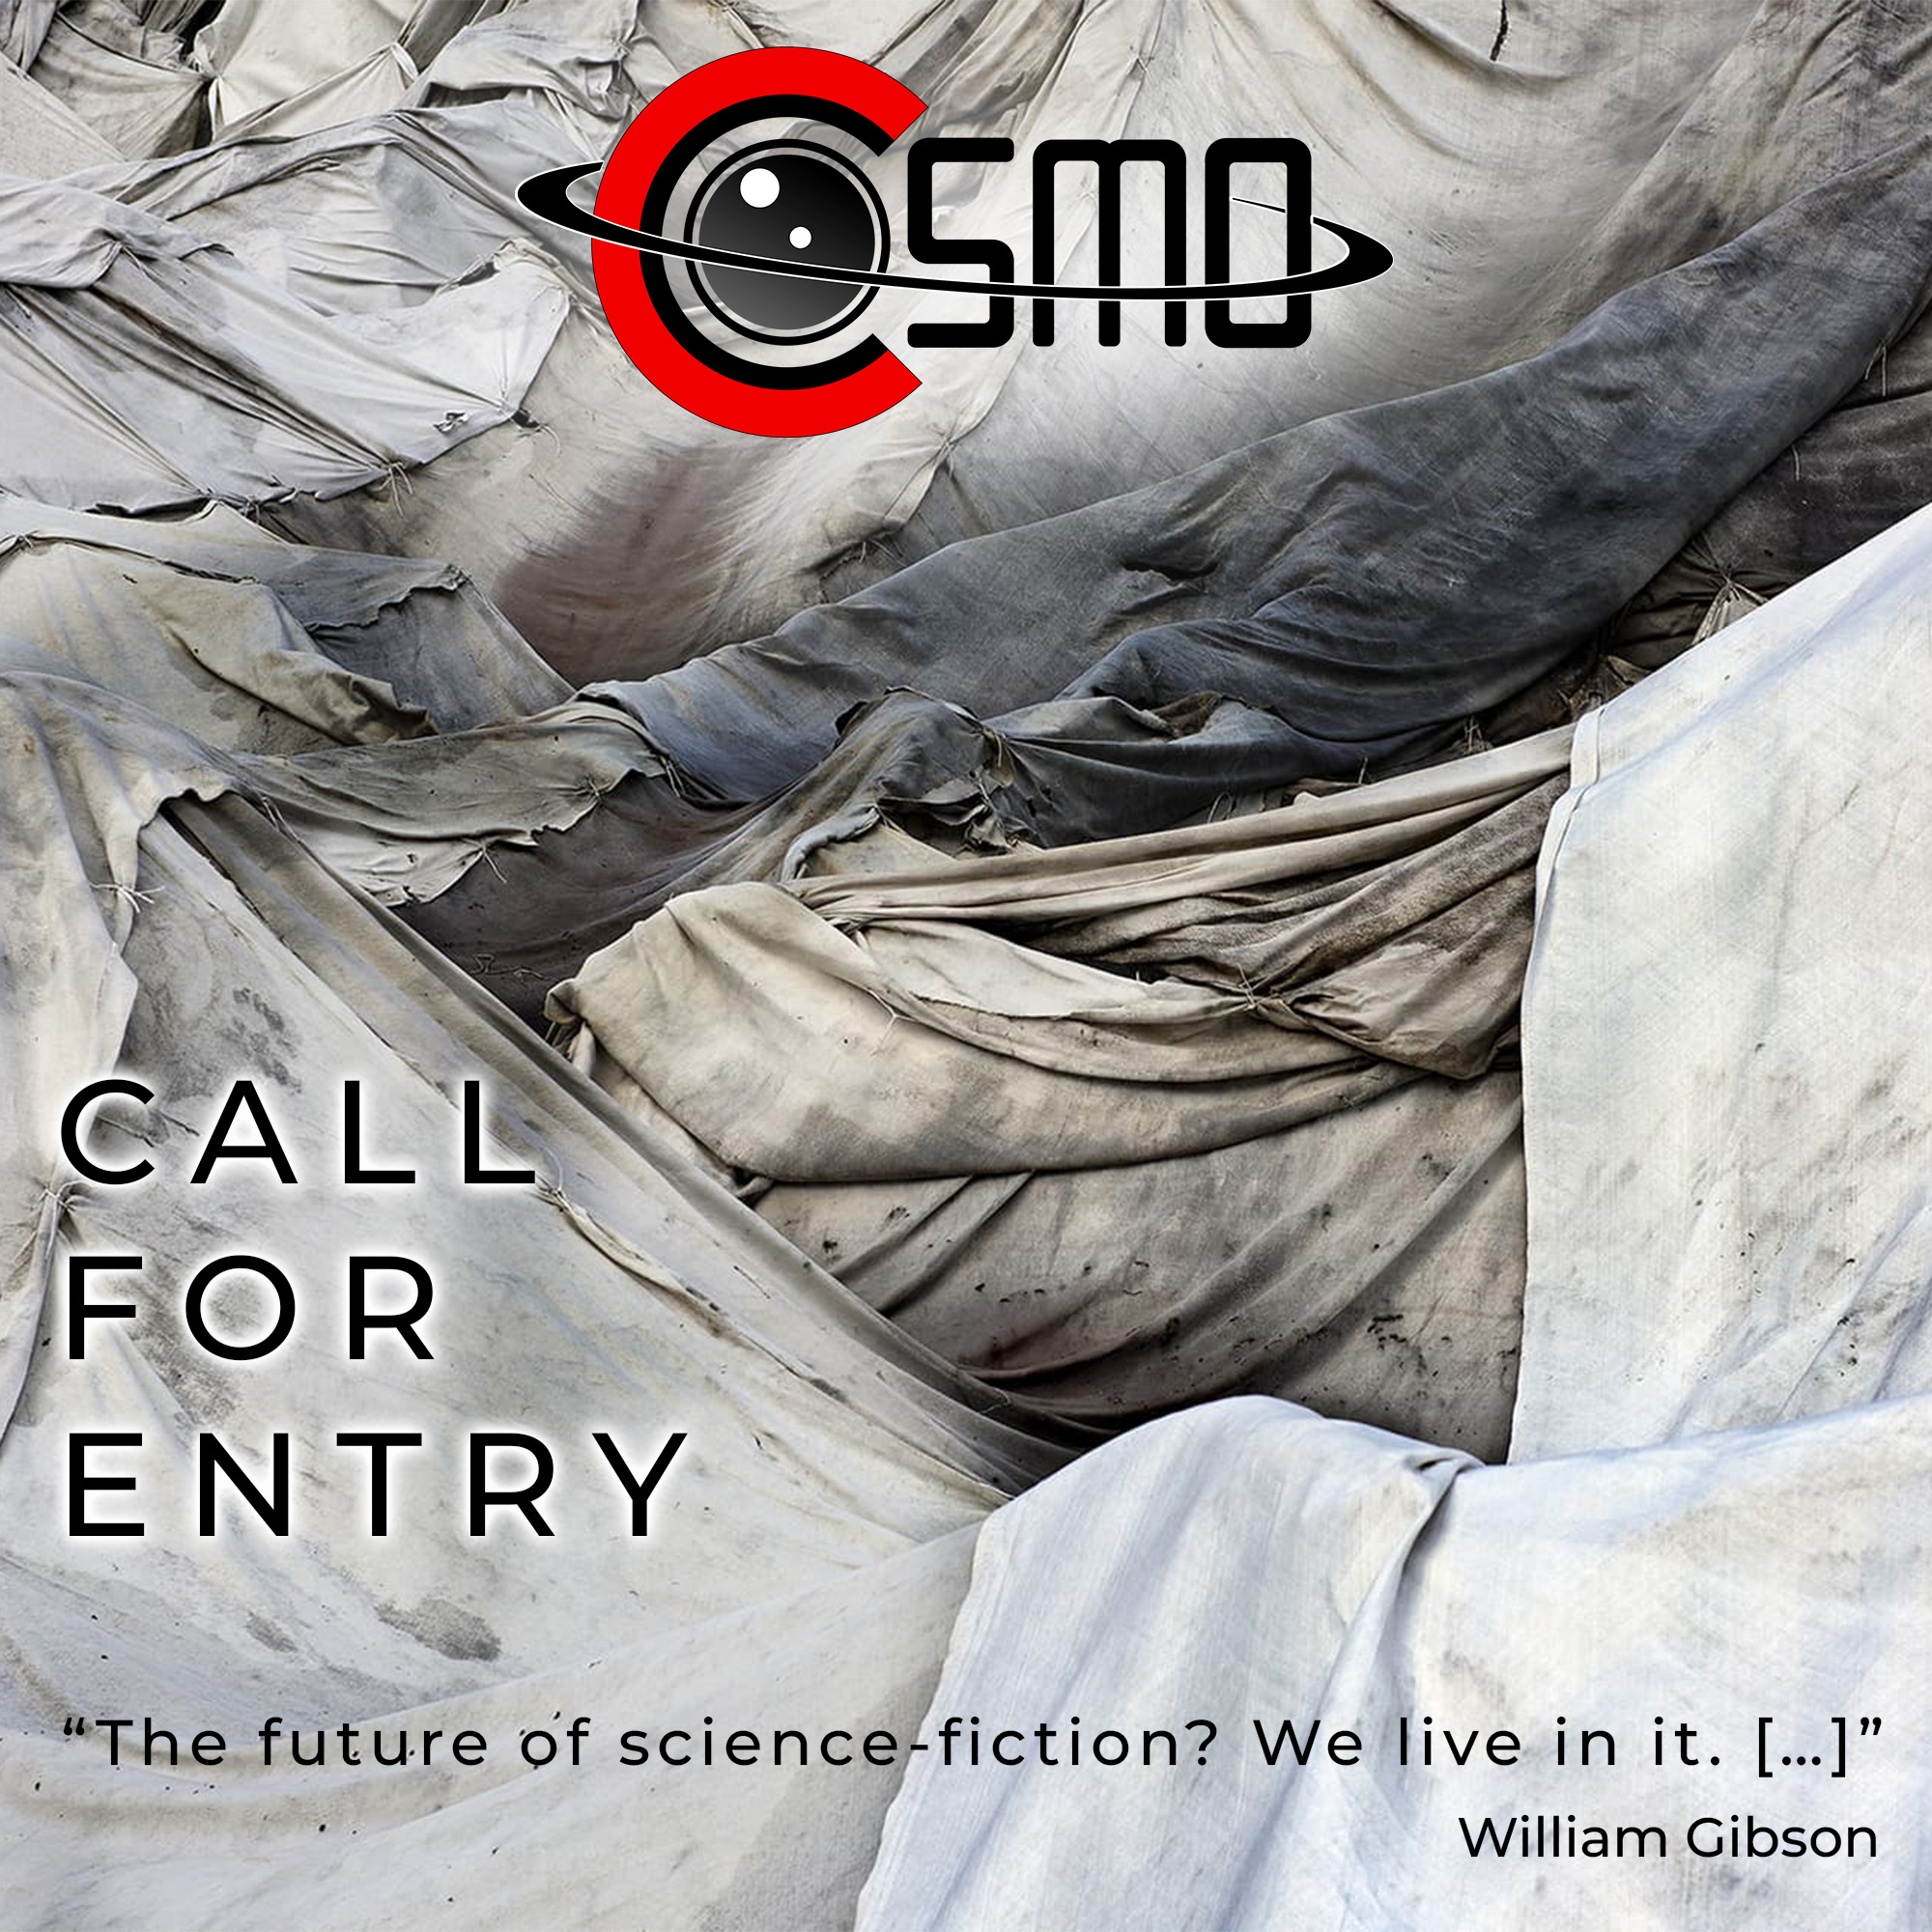 Call for entry Cosmophoto